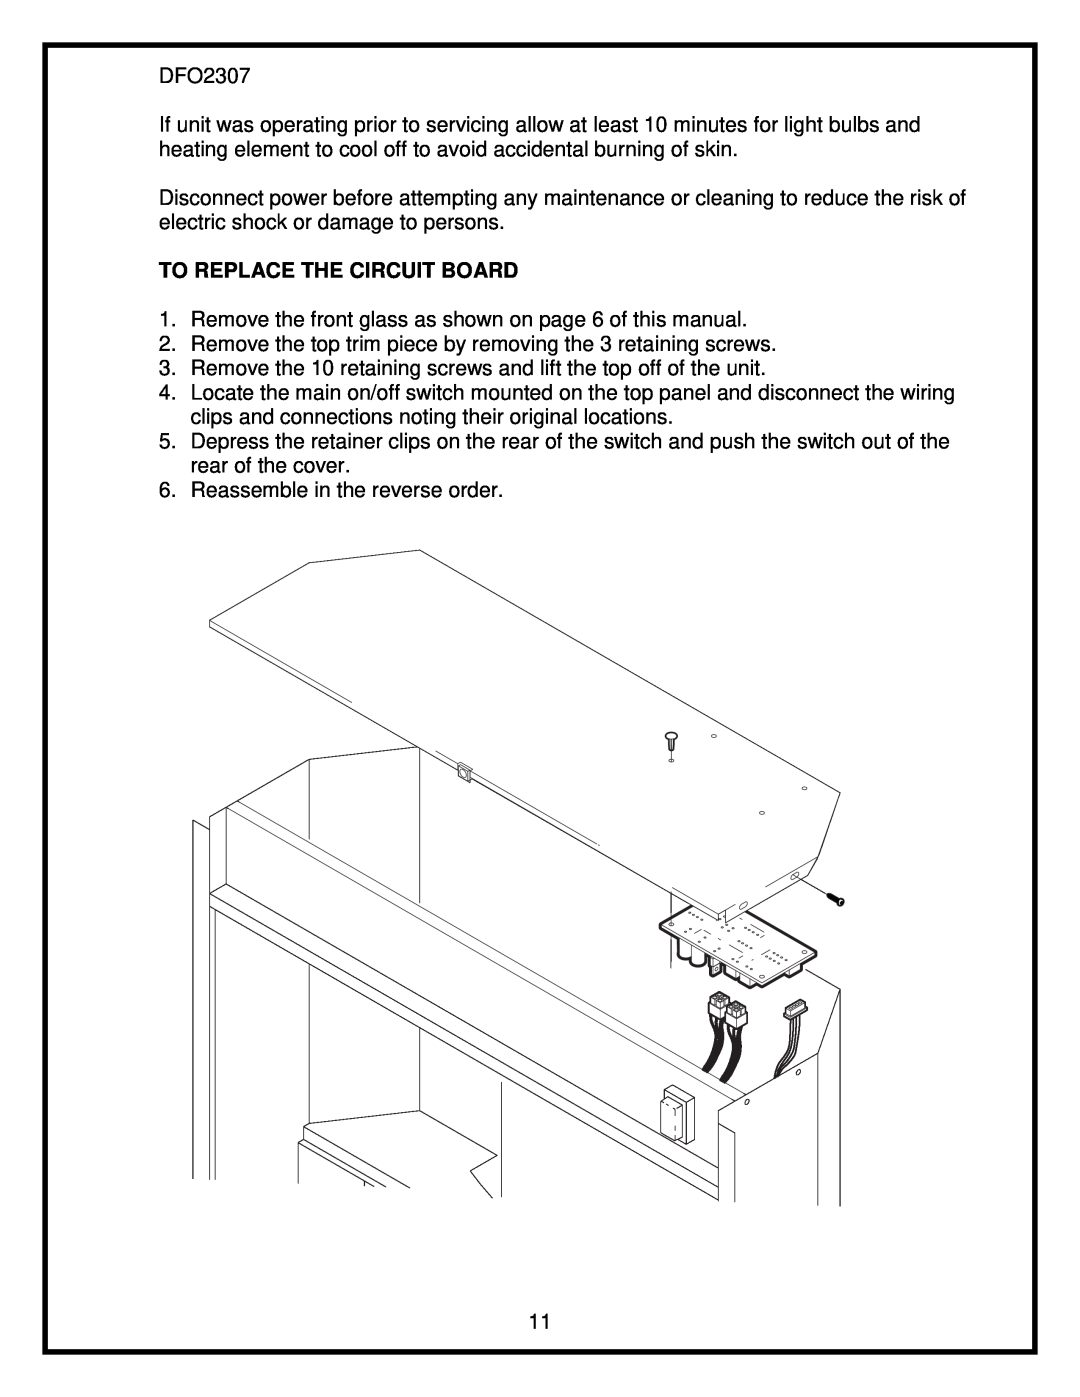 Dimplex DFO2307 service manual To Replace The Circuit Board 